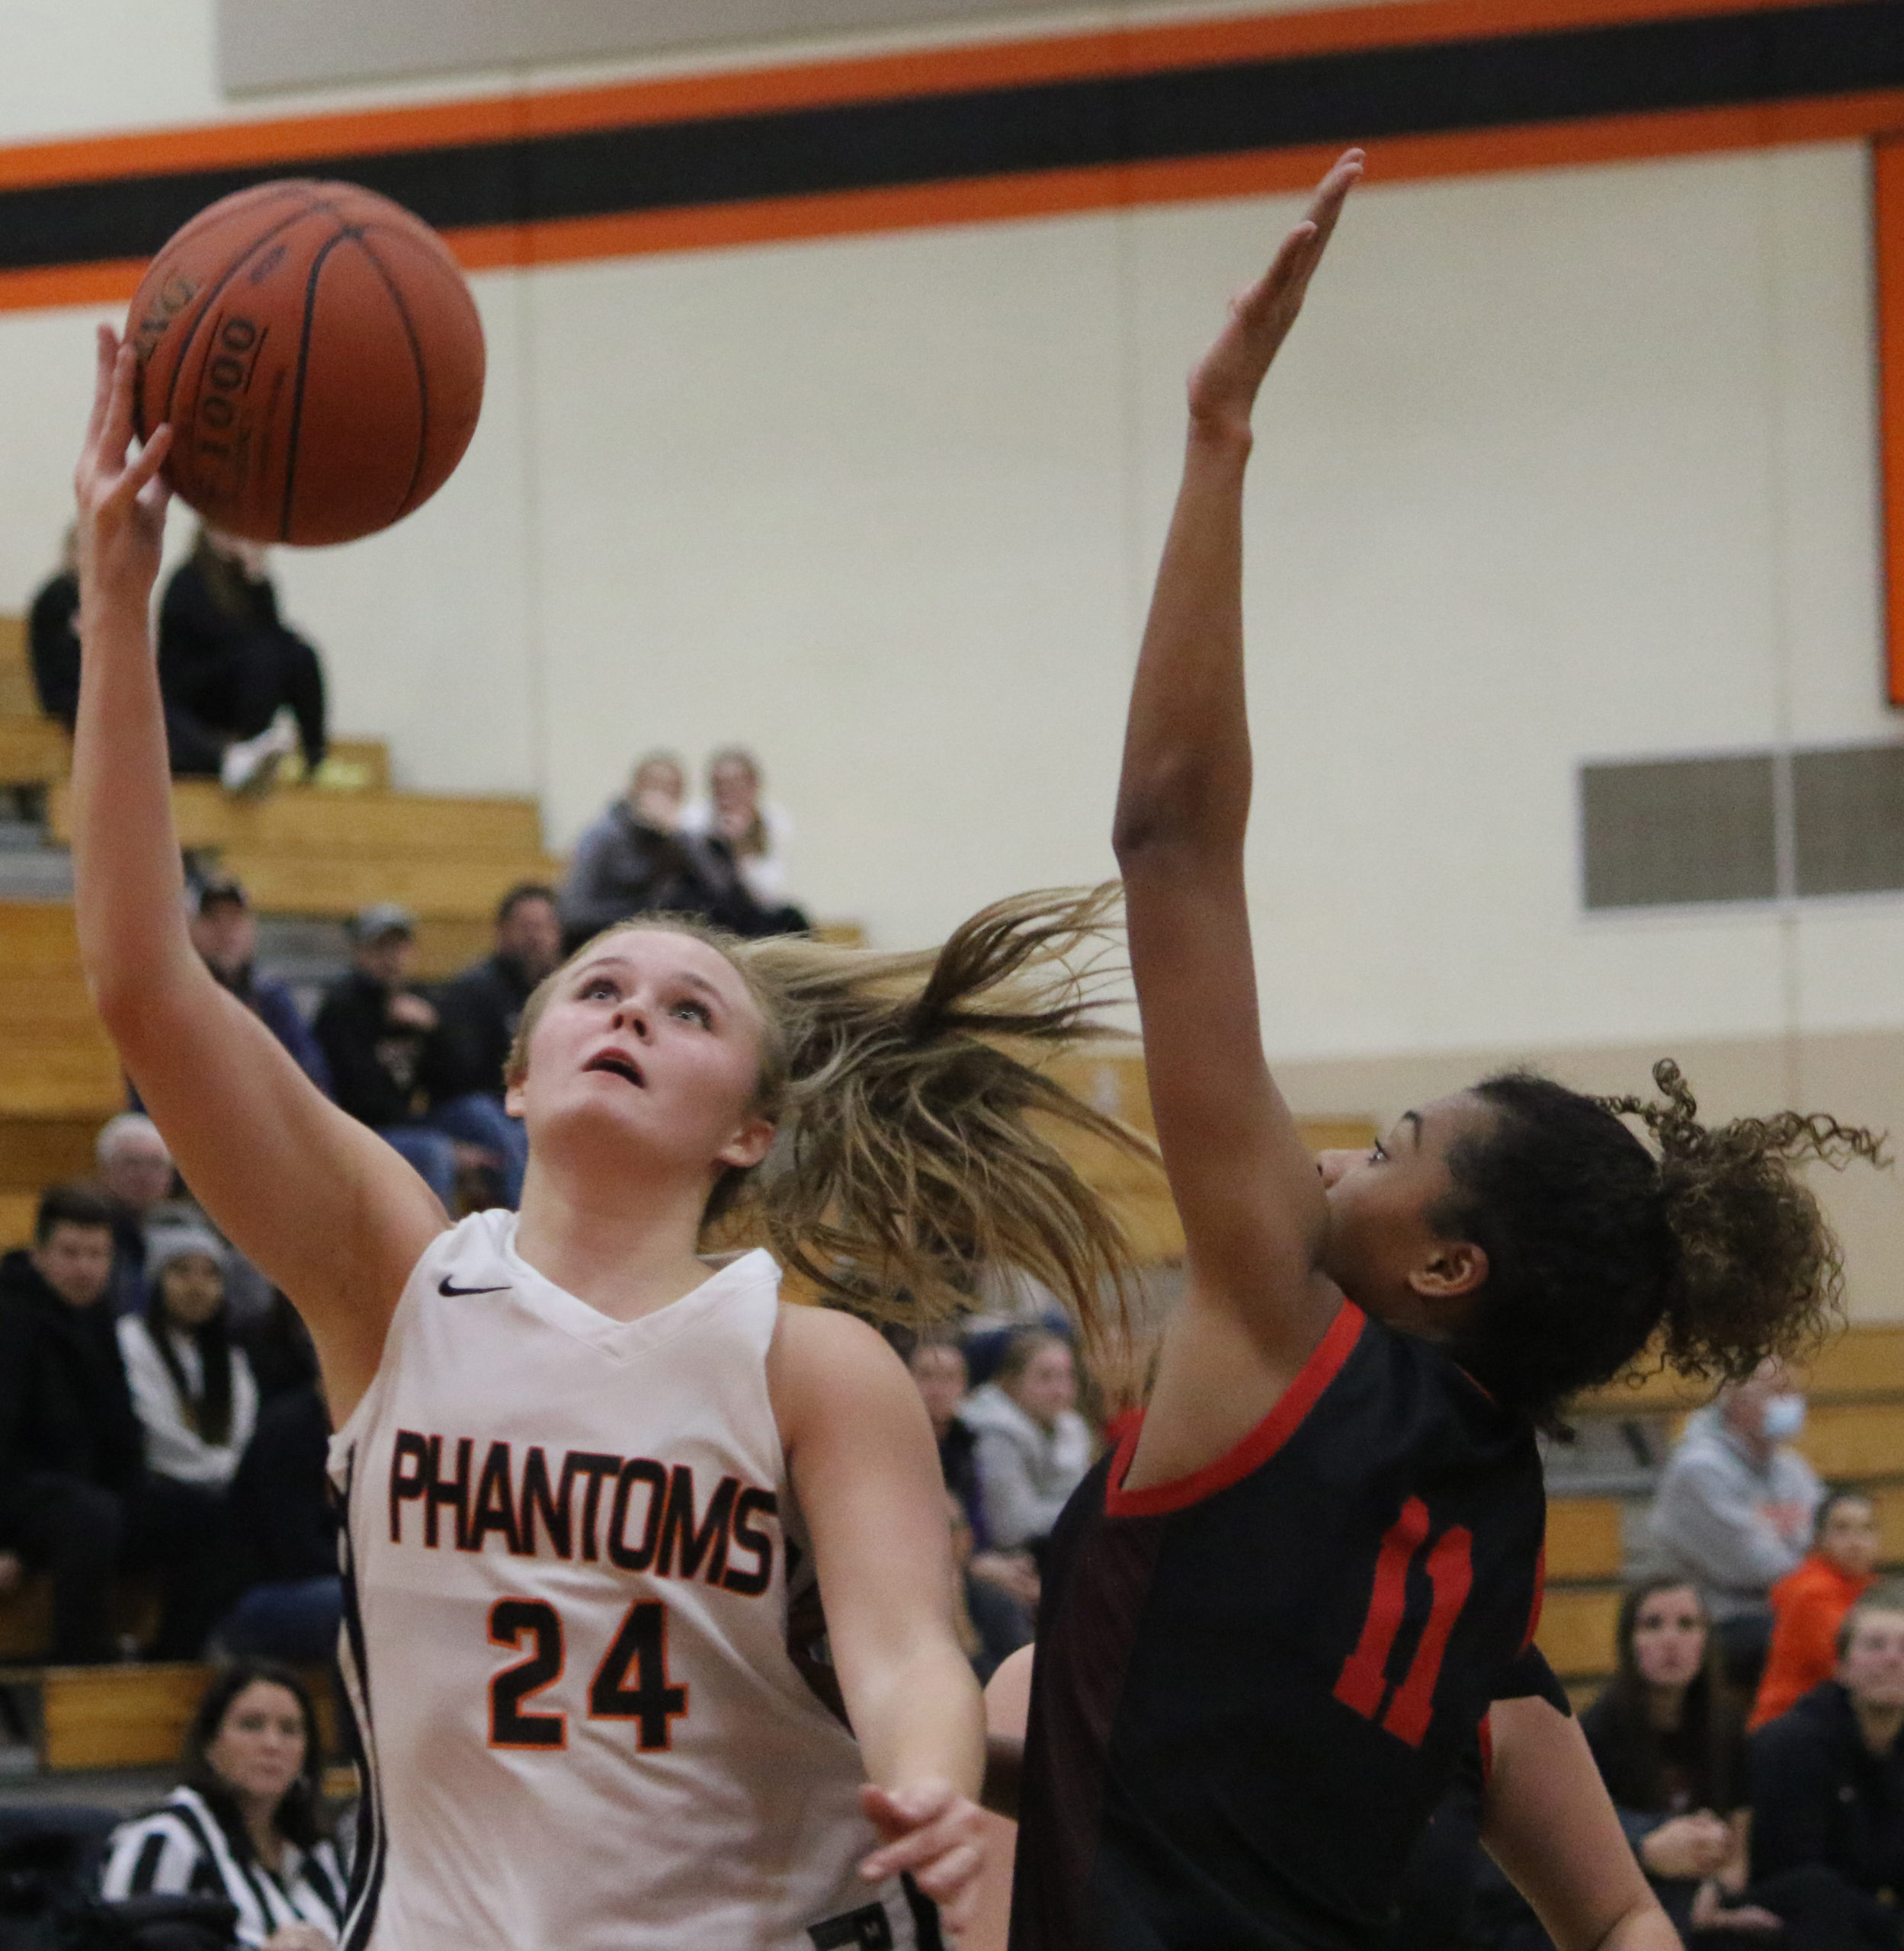 Phantoms improve to 9-1 by beating Seymour